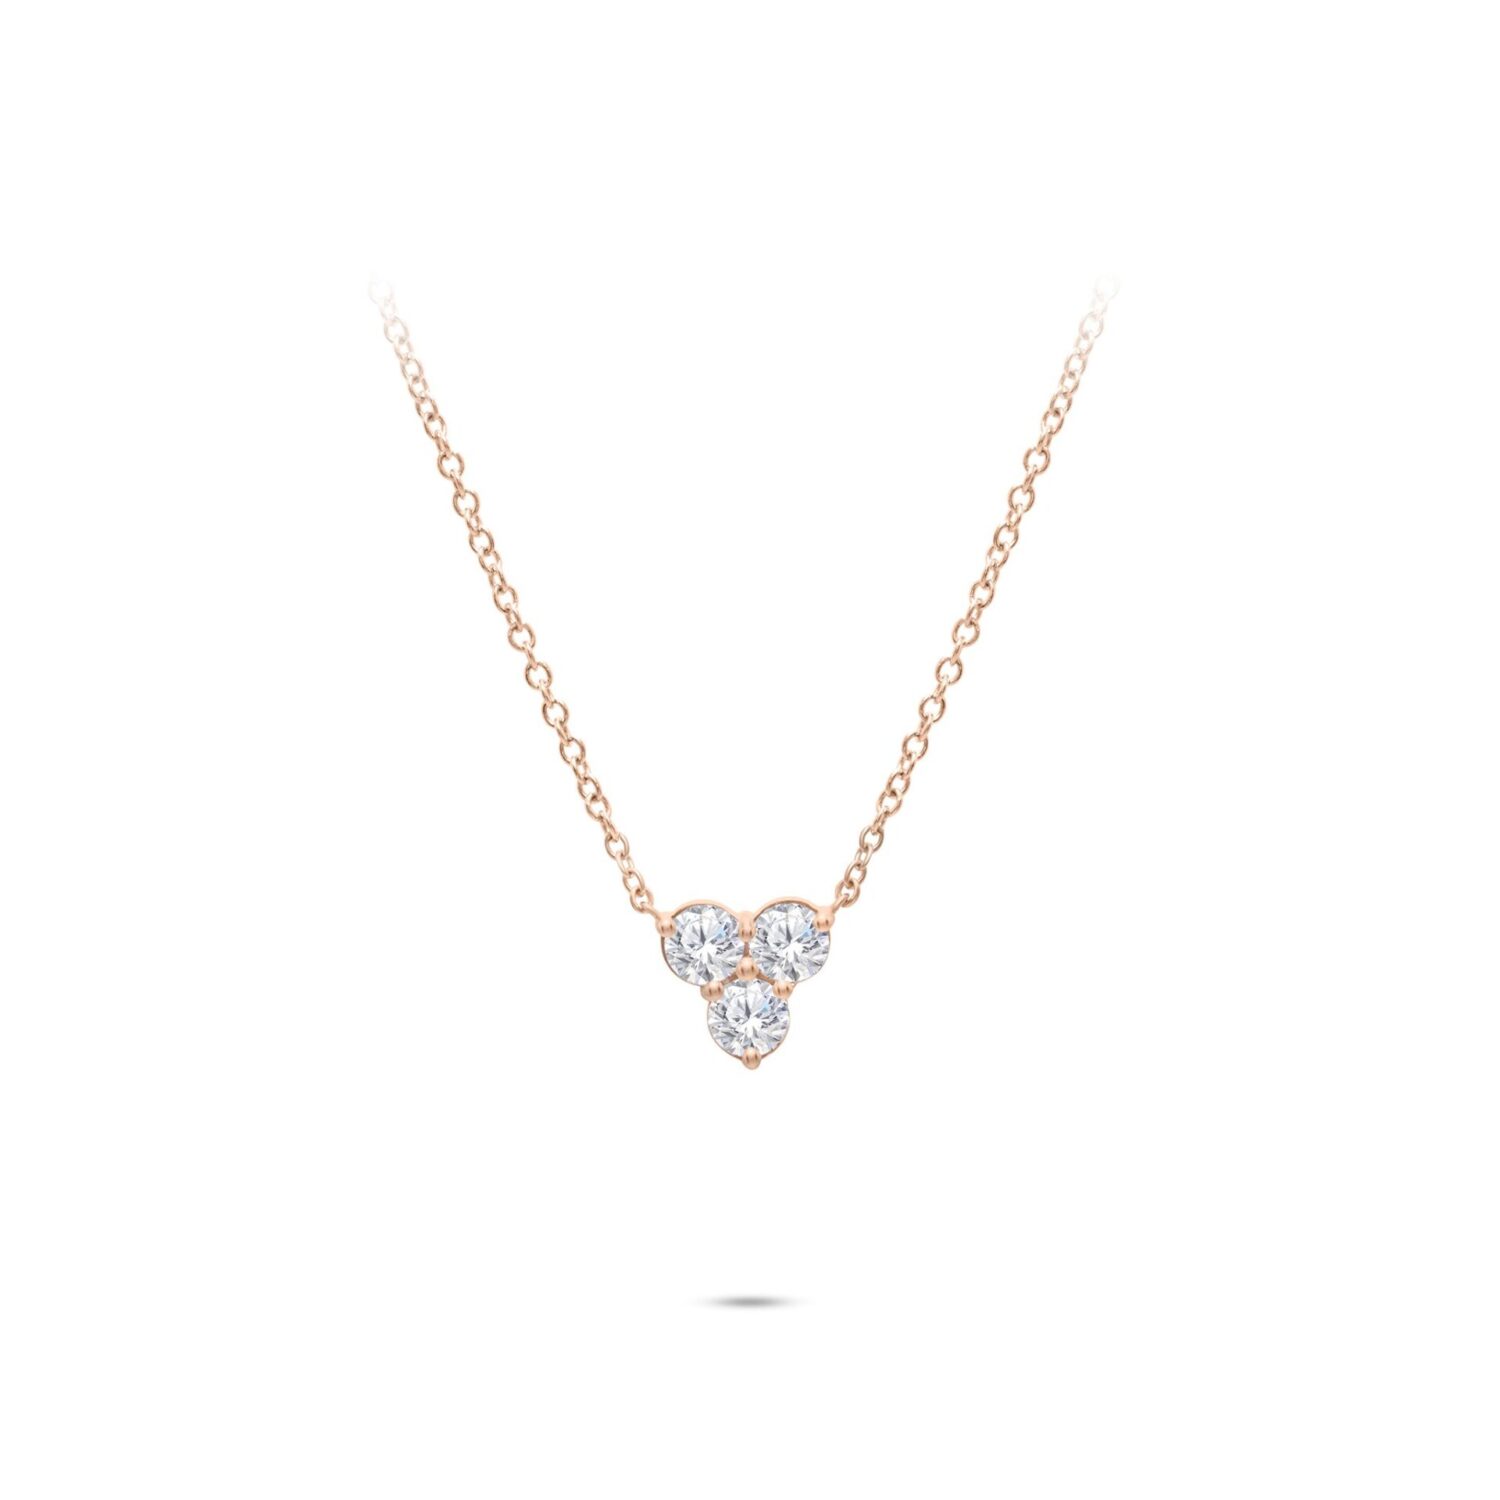 Lab grown diamonds in Cyprus - 3 Stone Necklace 0.9 Points best quality and price